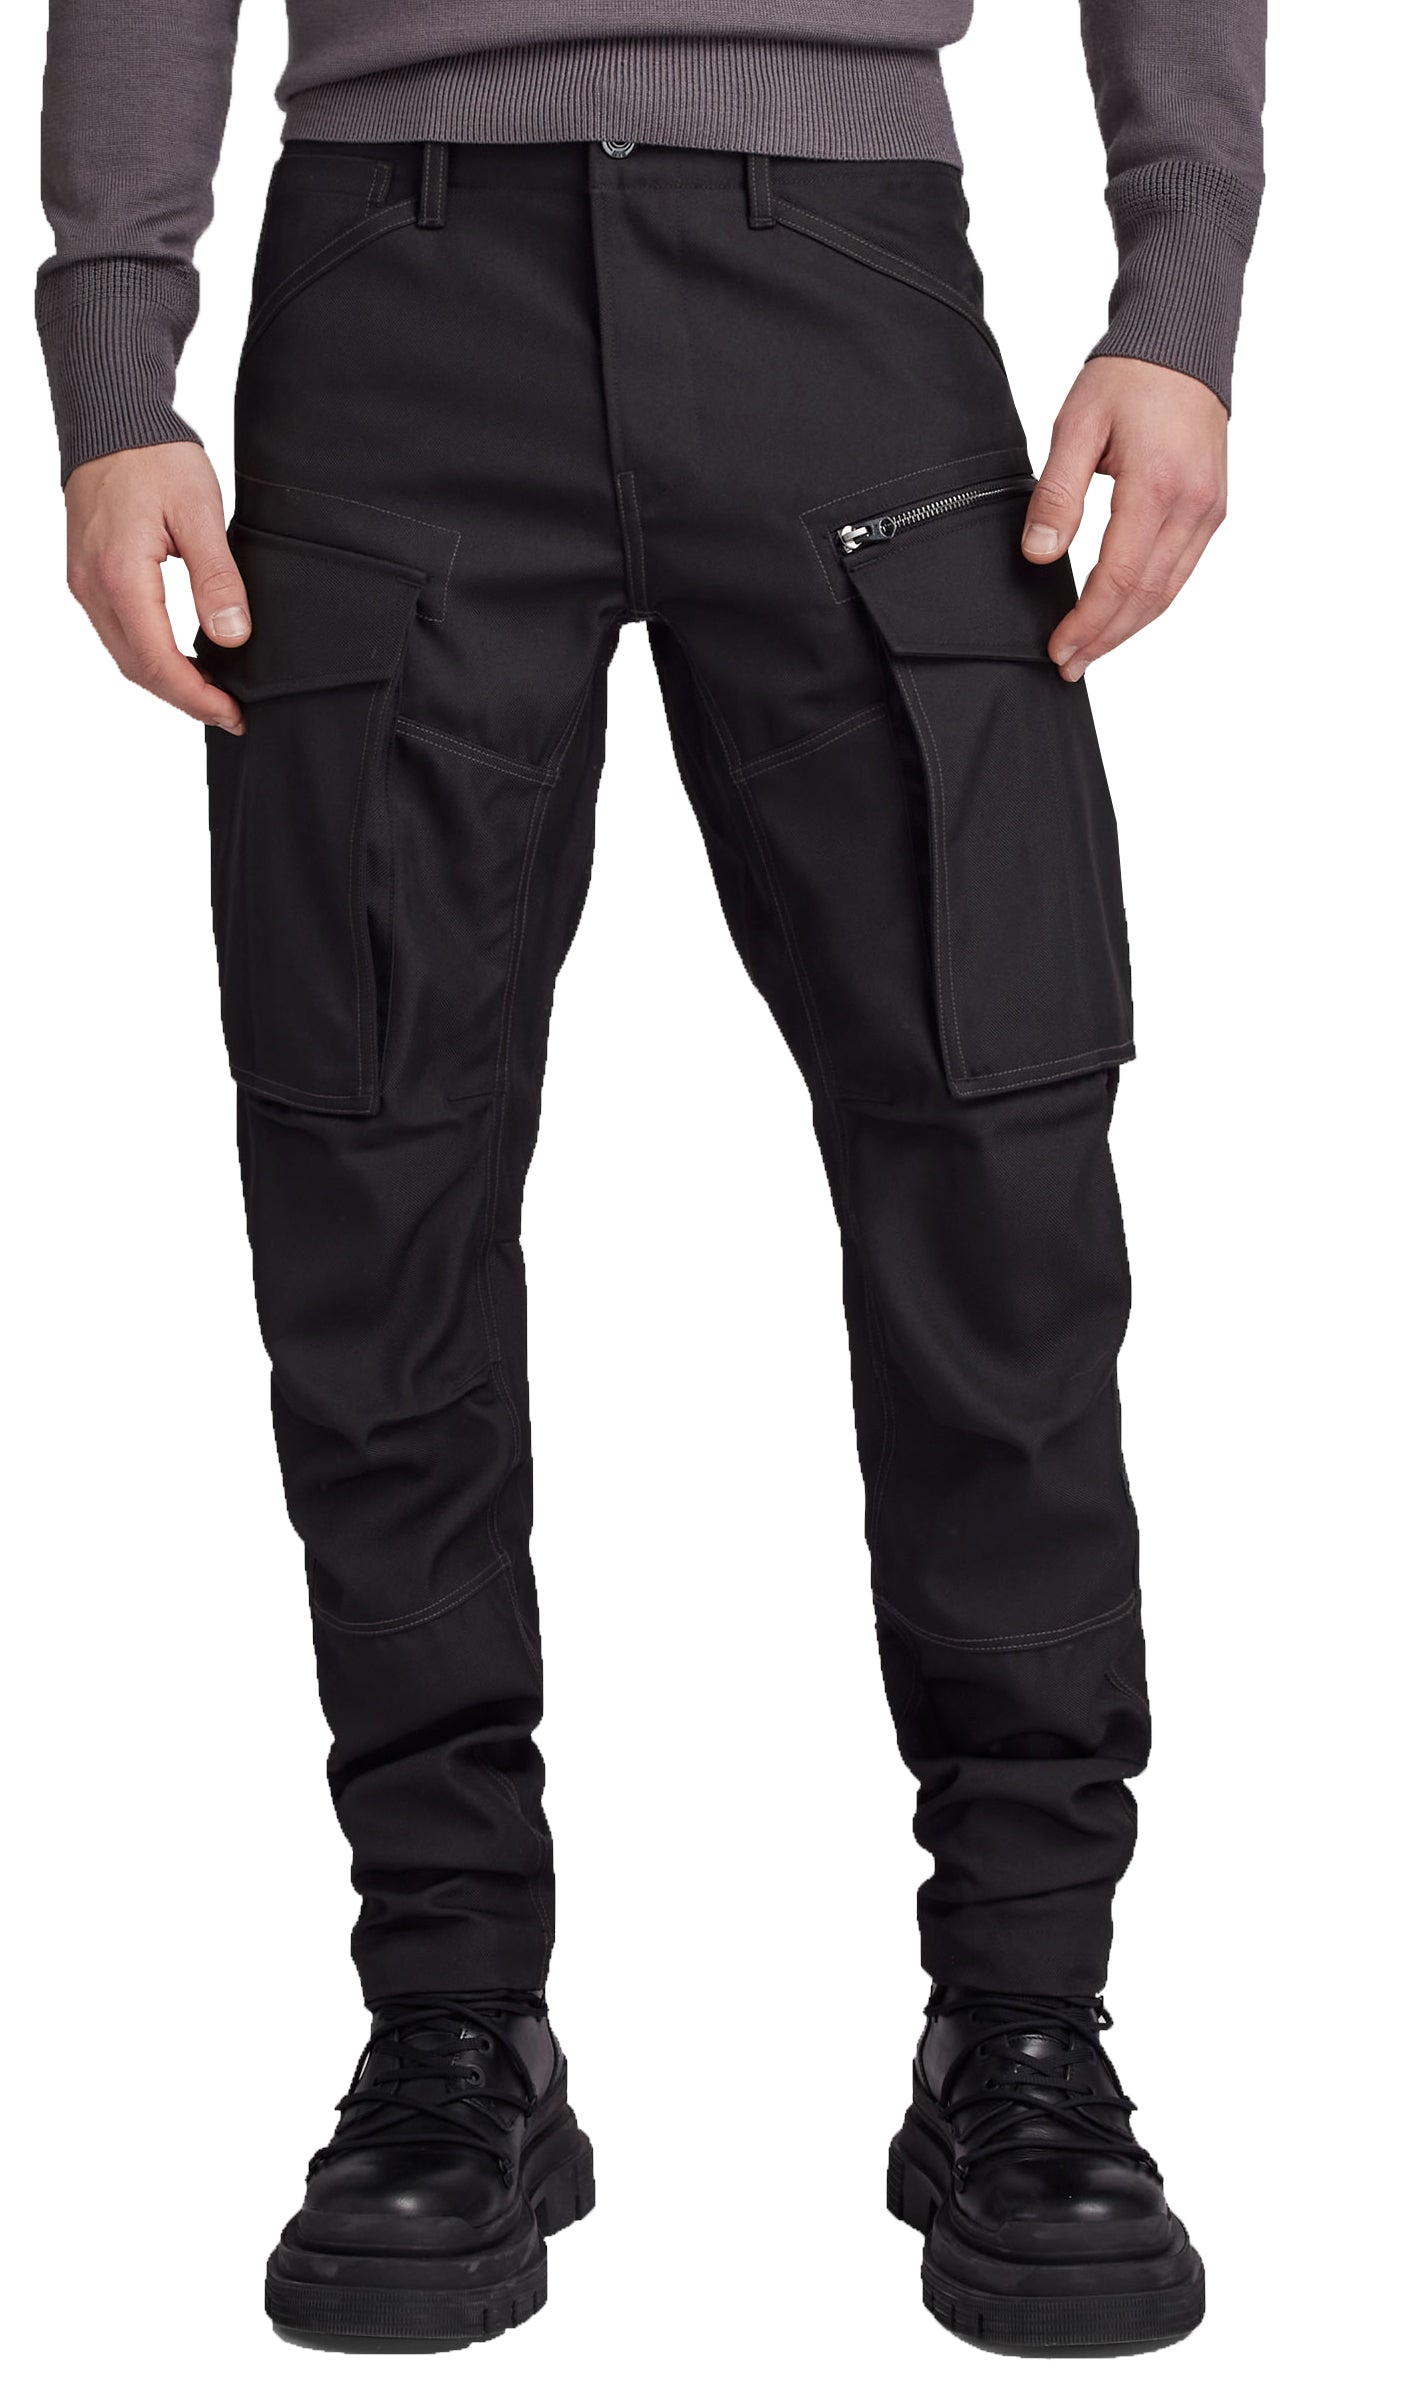 Founded on the philosophy “Just the product”, G-star RAW has become a leader in the denim industry. The brand is known for crafting distinct, textured pieces with soul.      Style# D02190-D410-6484     Gender: Men's     3D zip Knee regular tapered     Color: Dk Black     Front and Back pockets     Button and zip Closure     Belt Loops